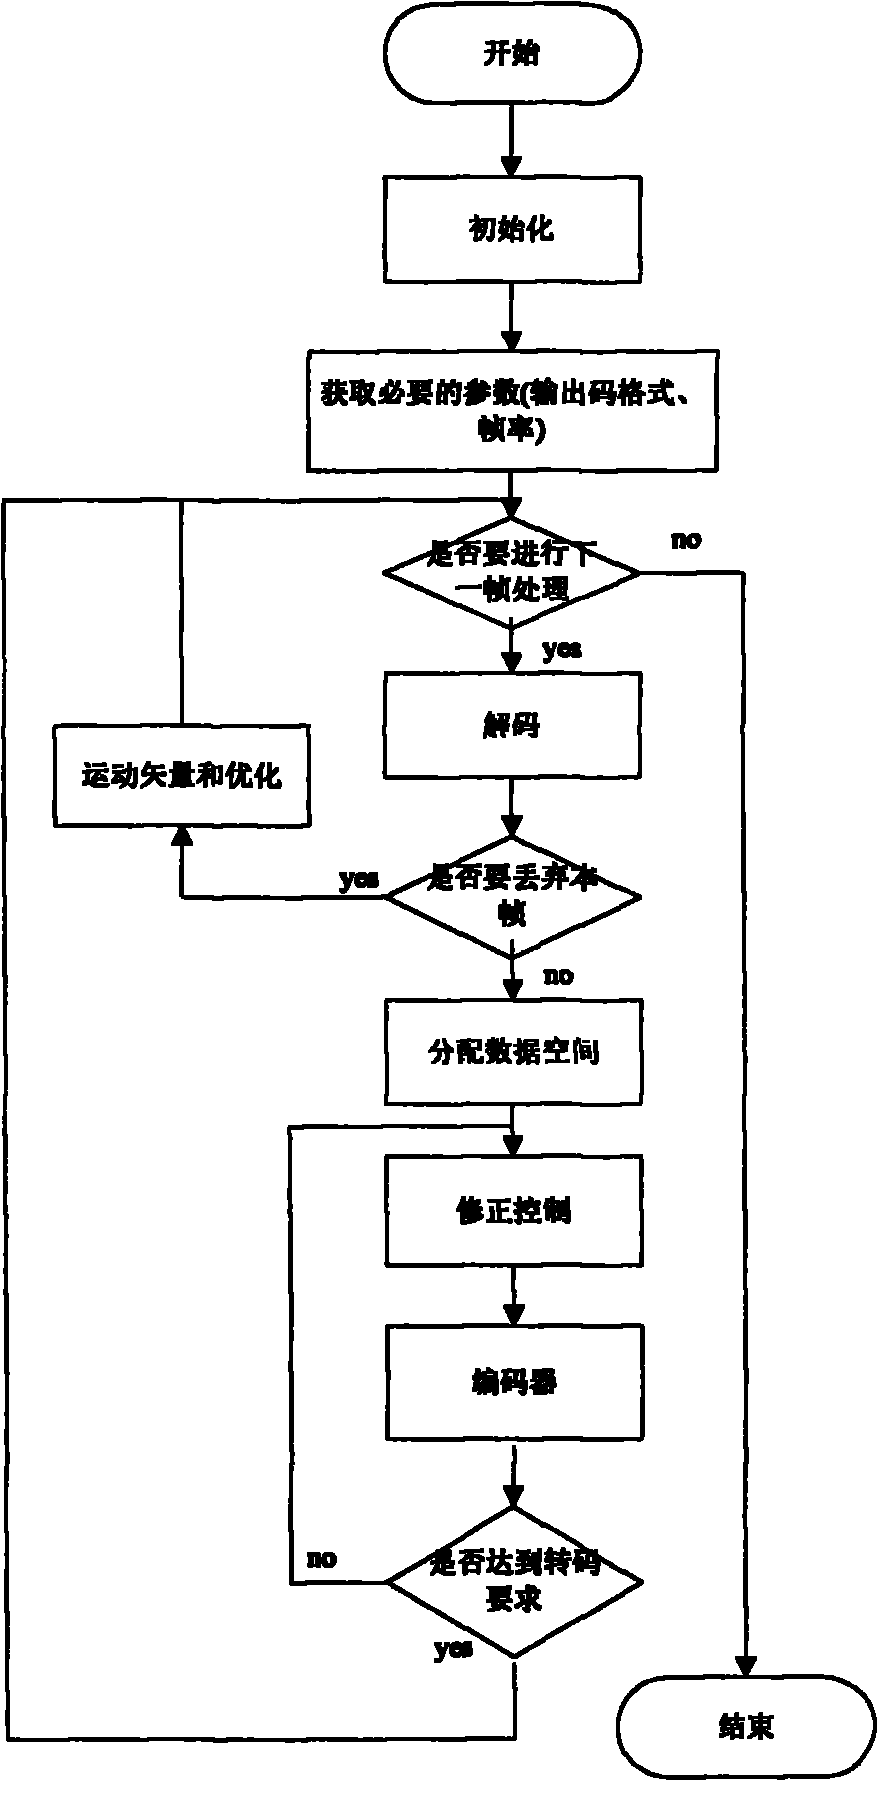 Embedded interactive application service transcoding and encoding system